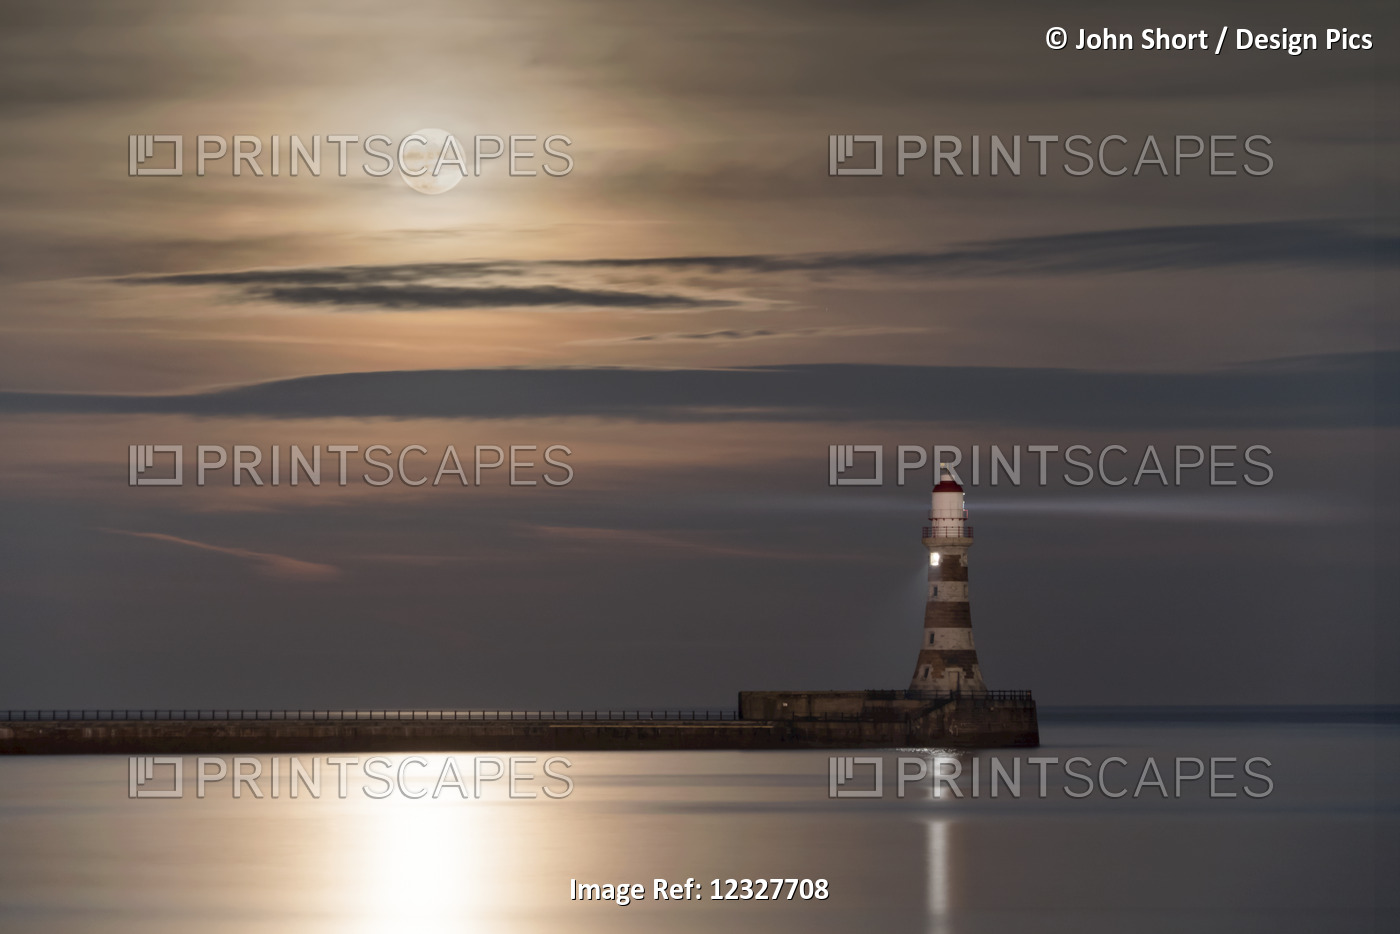 Roker Lighthouse Glowing At The End Of A Pier Under A Bright Full Moon ...